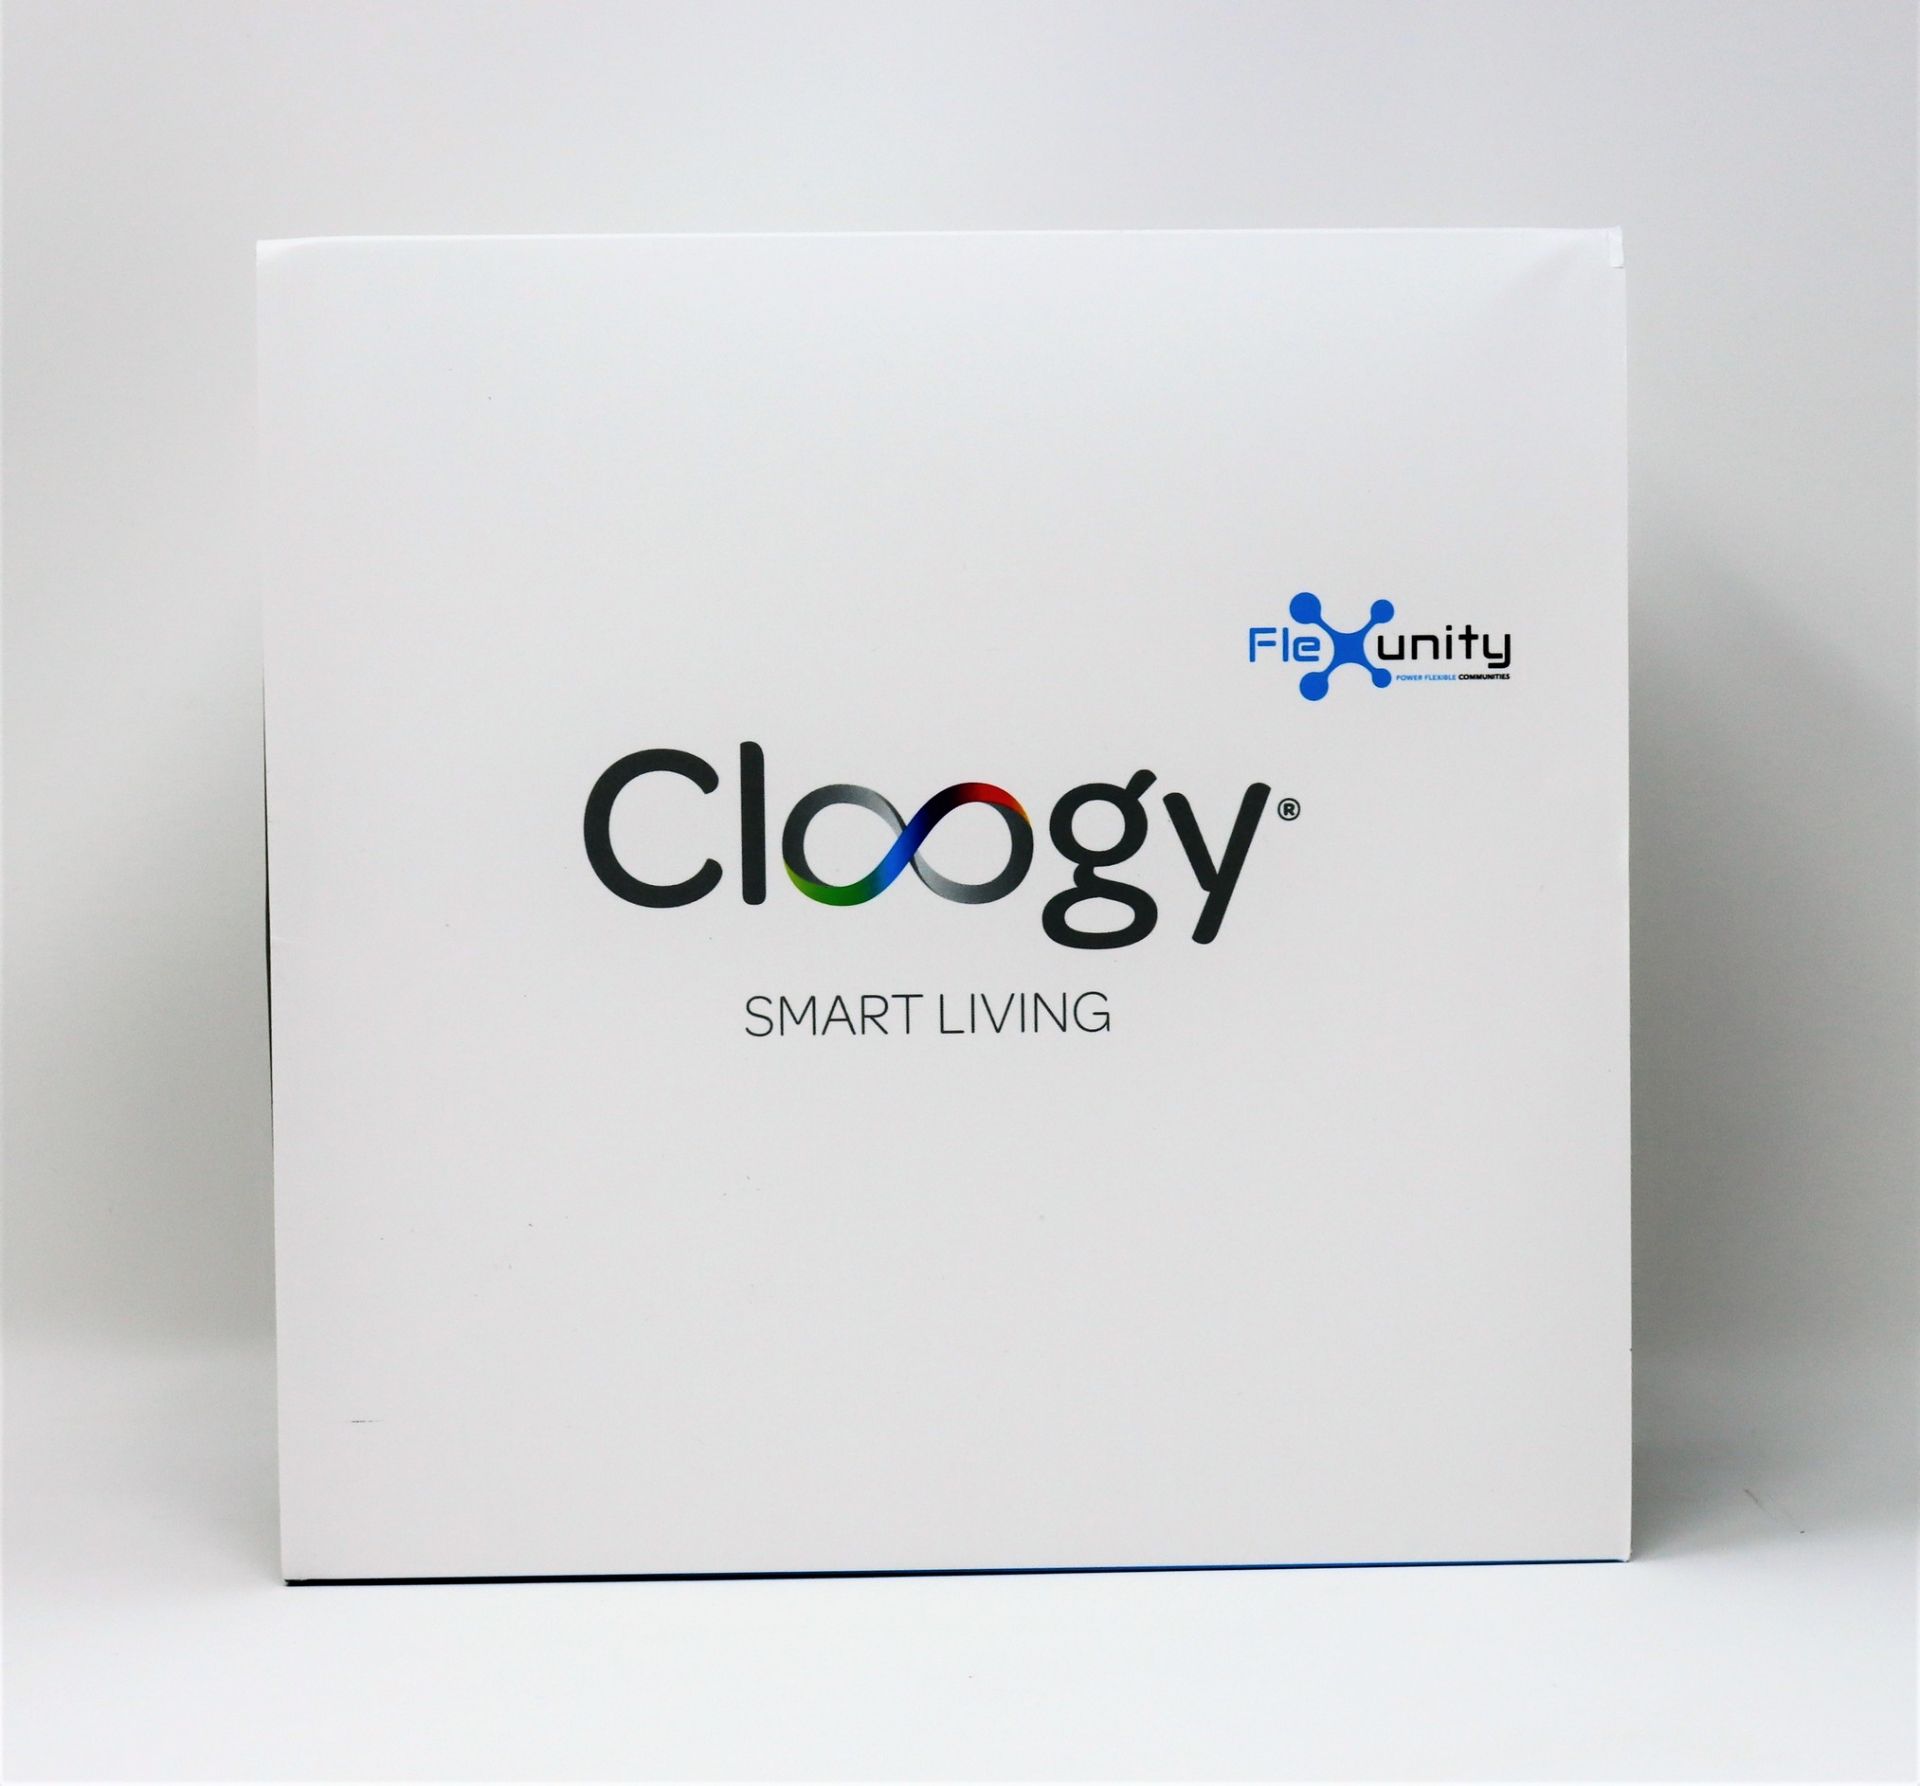 A boxed as new Cloogy Flexunity Edition Household Energy Management Solution Kit (Box opened, UK